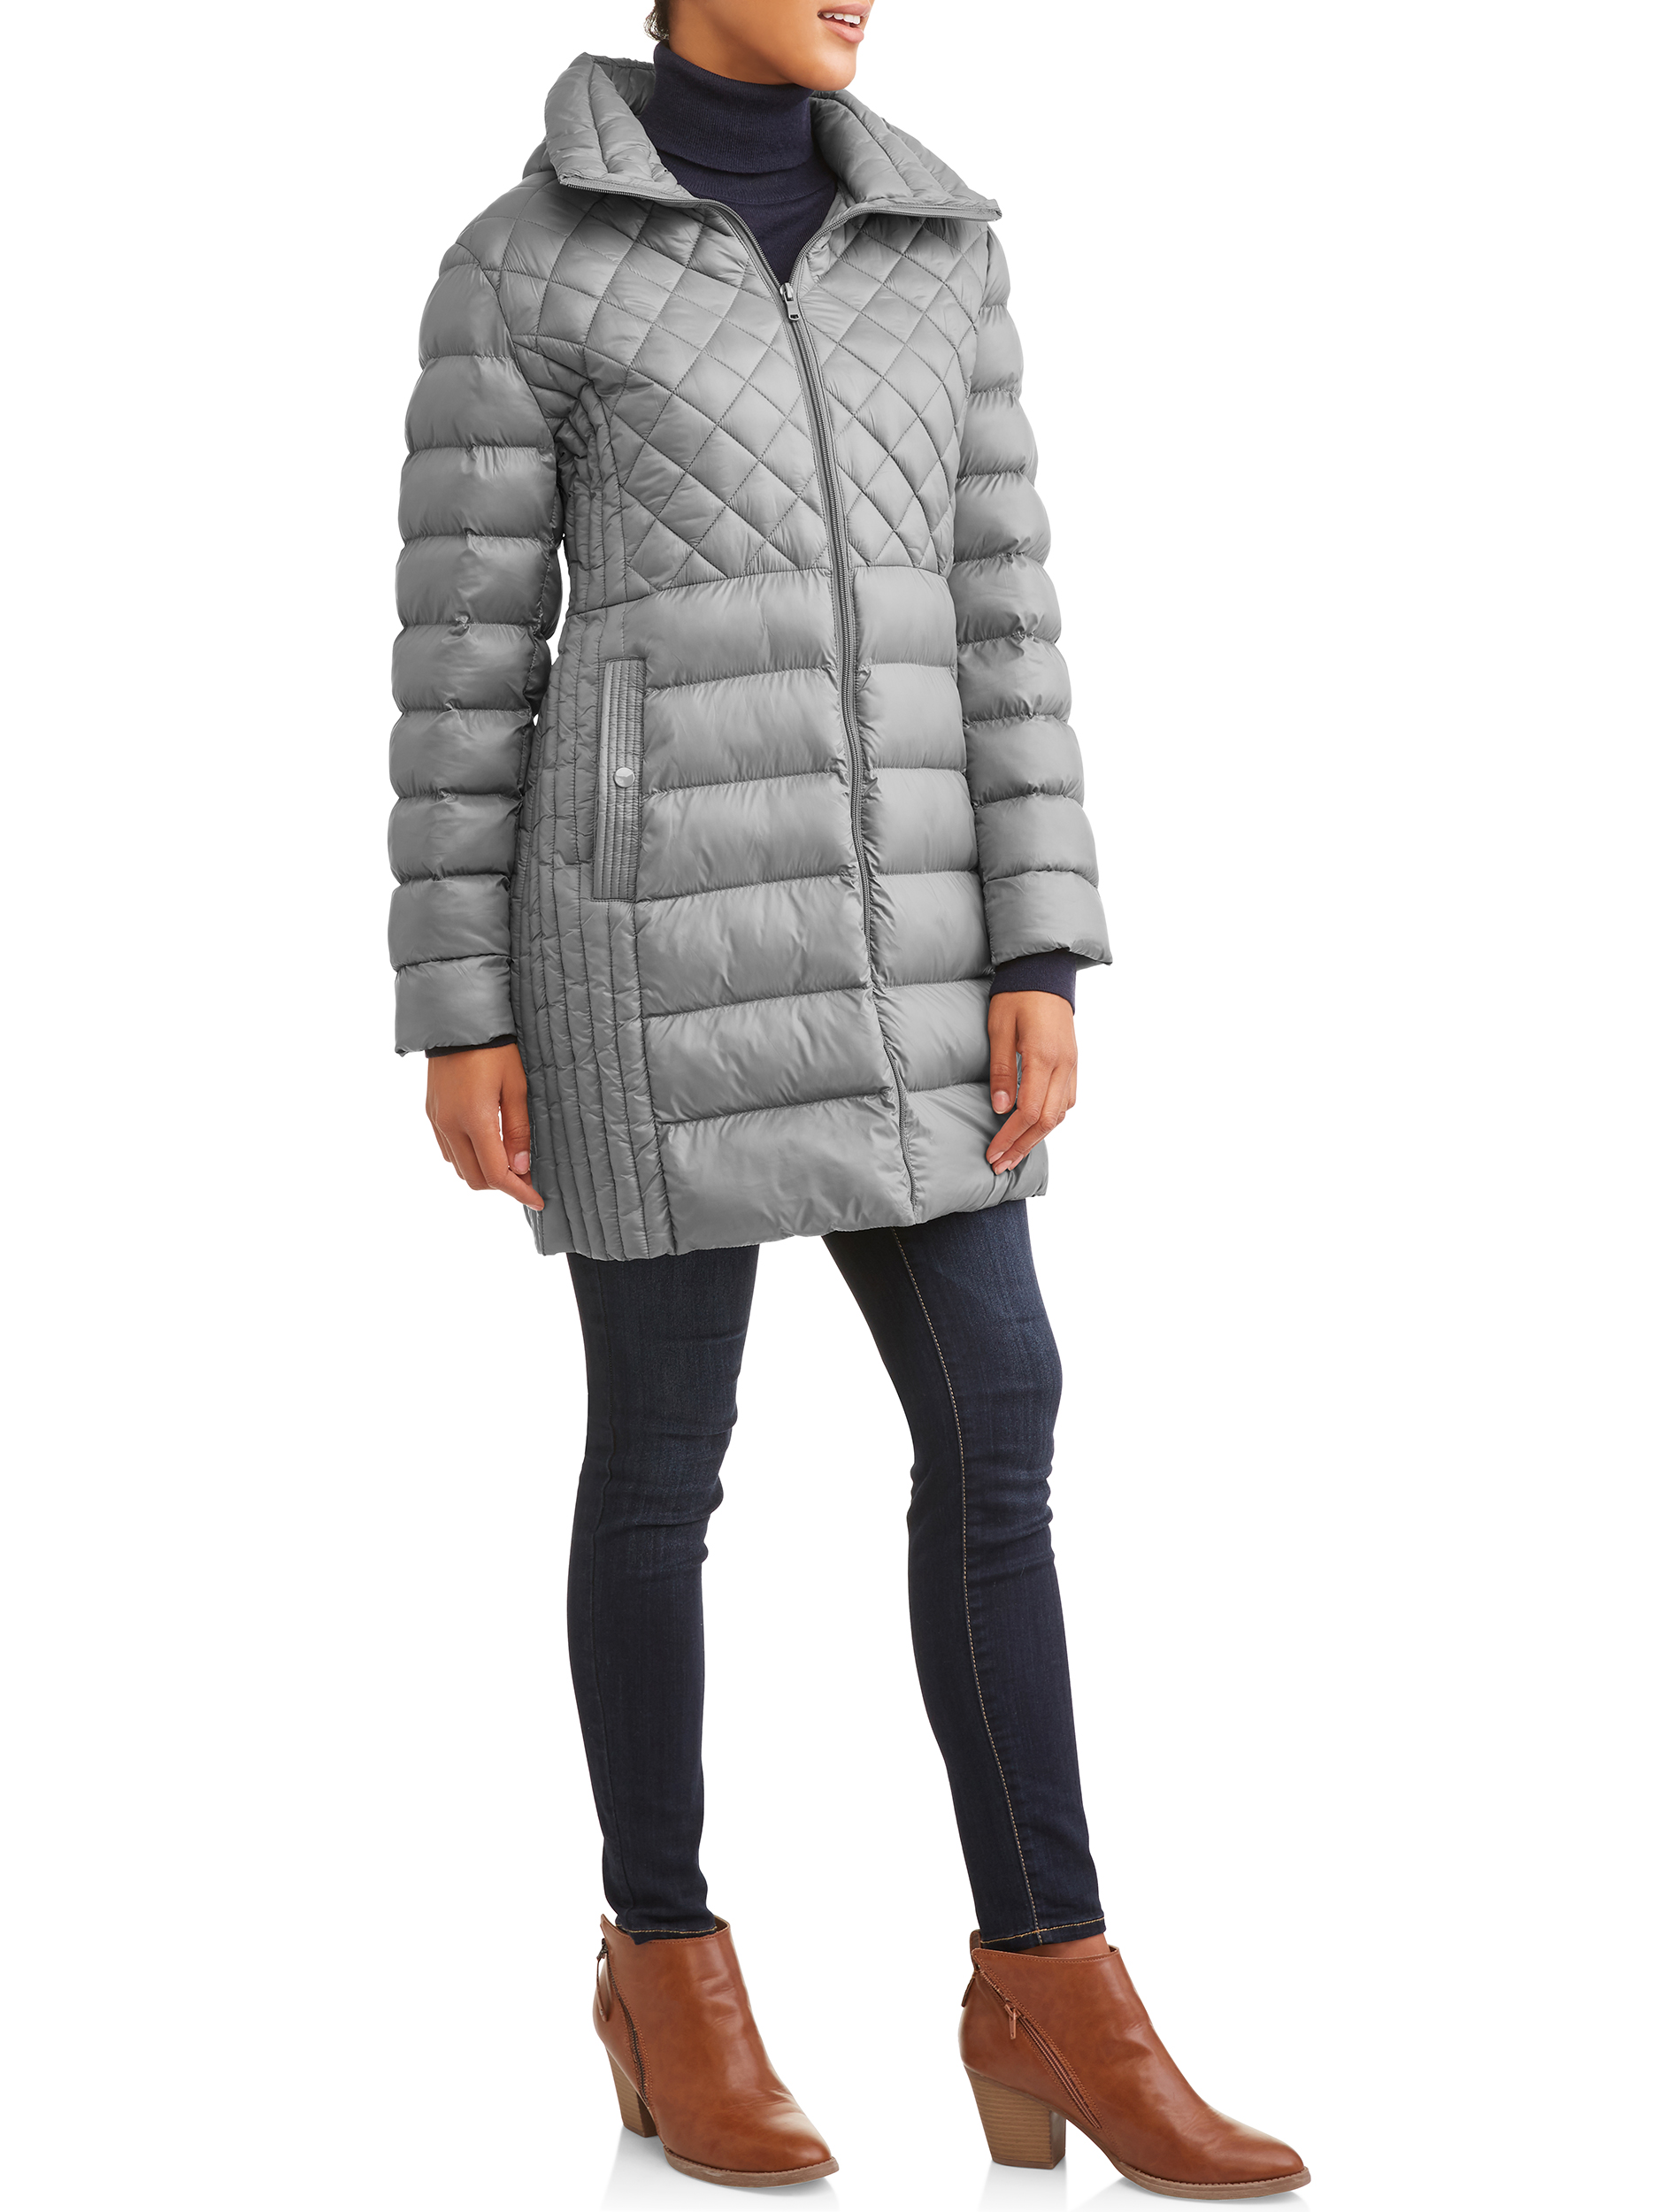 30 First Women's Quilted Puffer Jacket - image 3 of 4